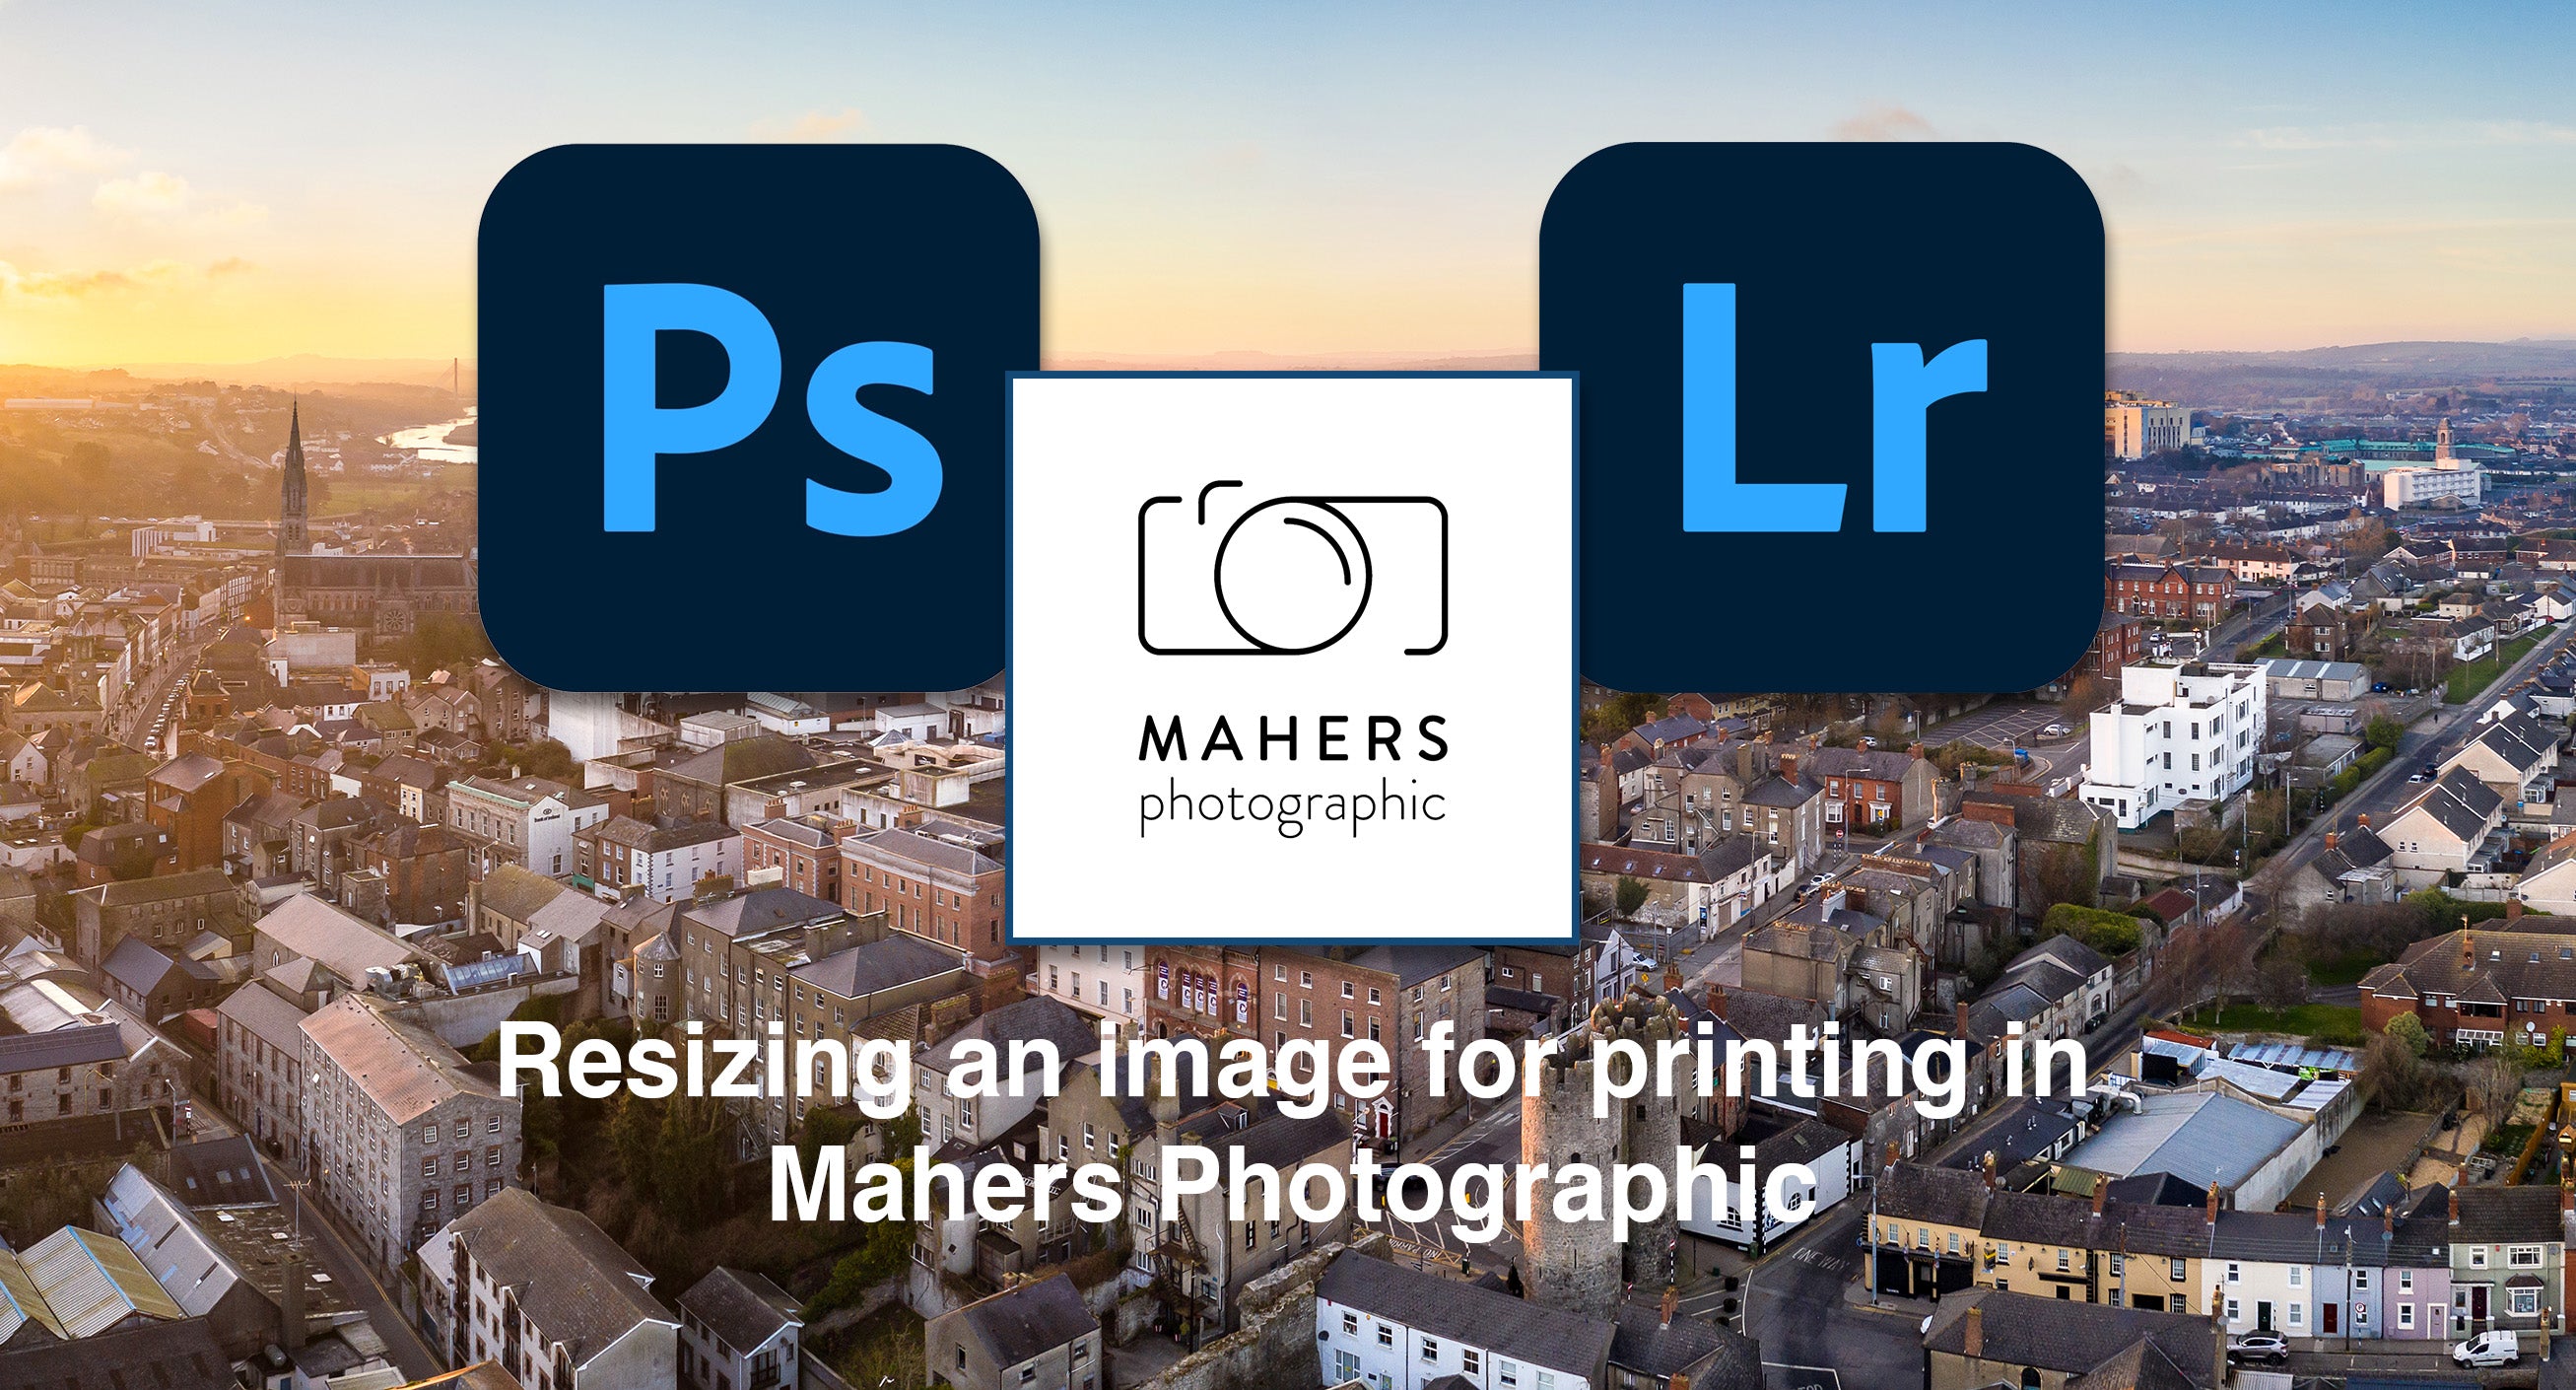 Resizing an image for printing in Mahers Photographic